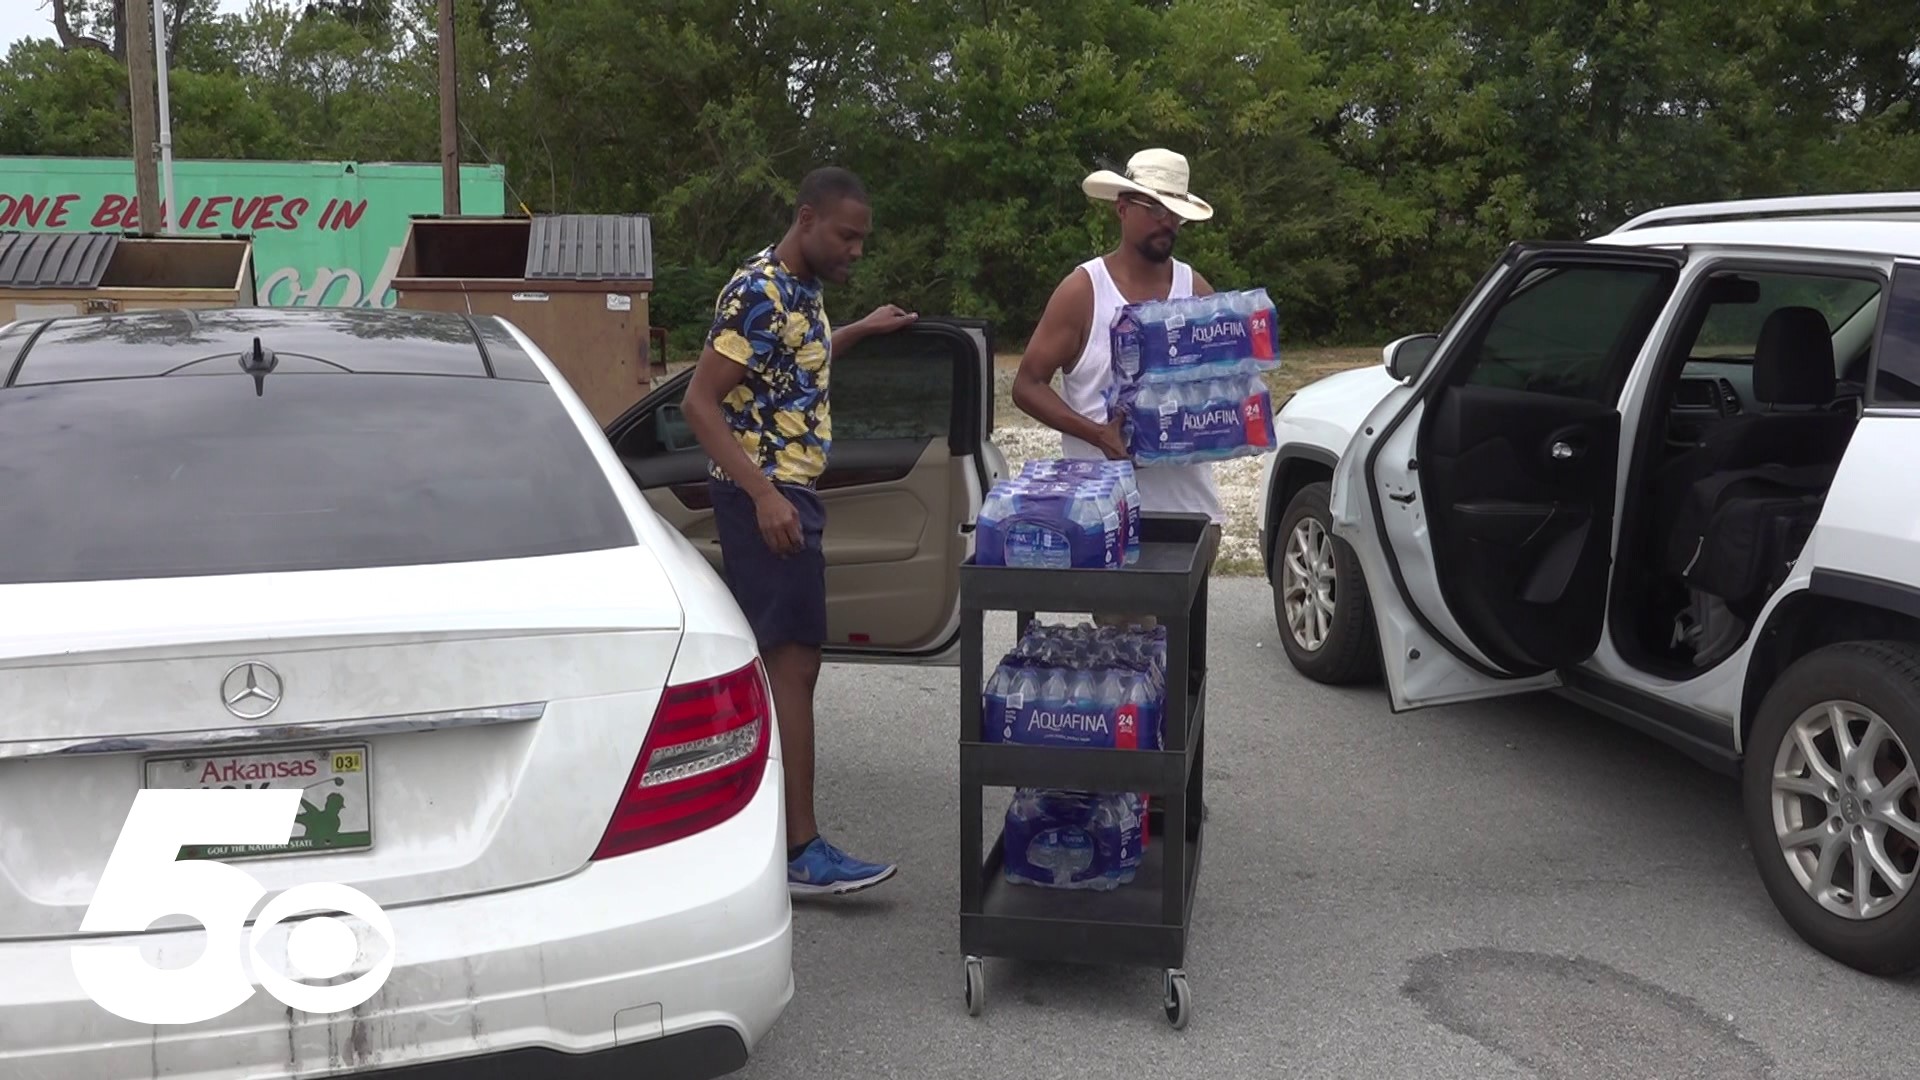 The Black Action Collective parted with the Iota Theta Fraternity and Councilman D'Andre Jones for the "Hydrate for Hope" water bottle drive.